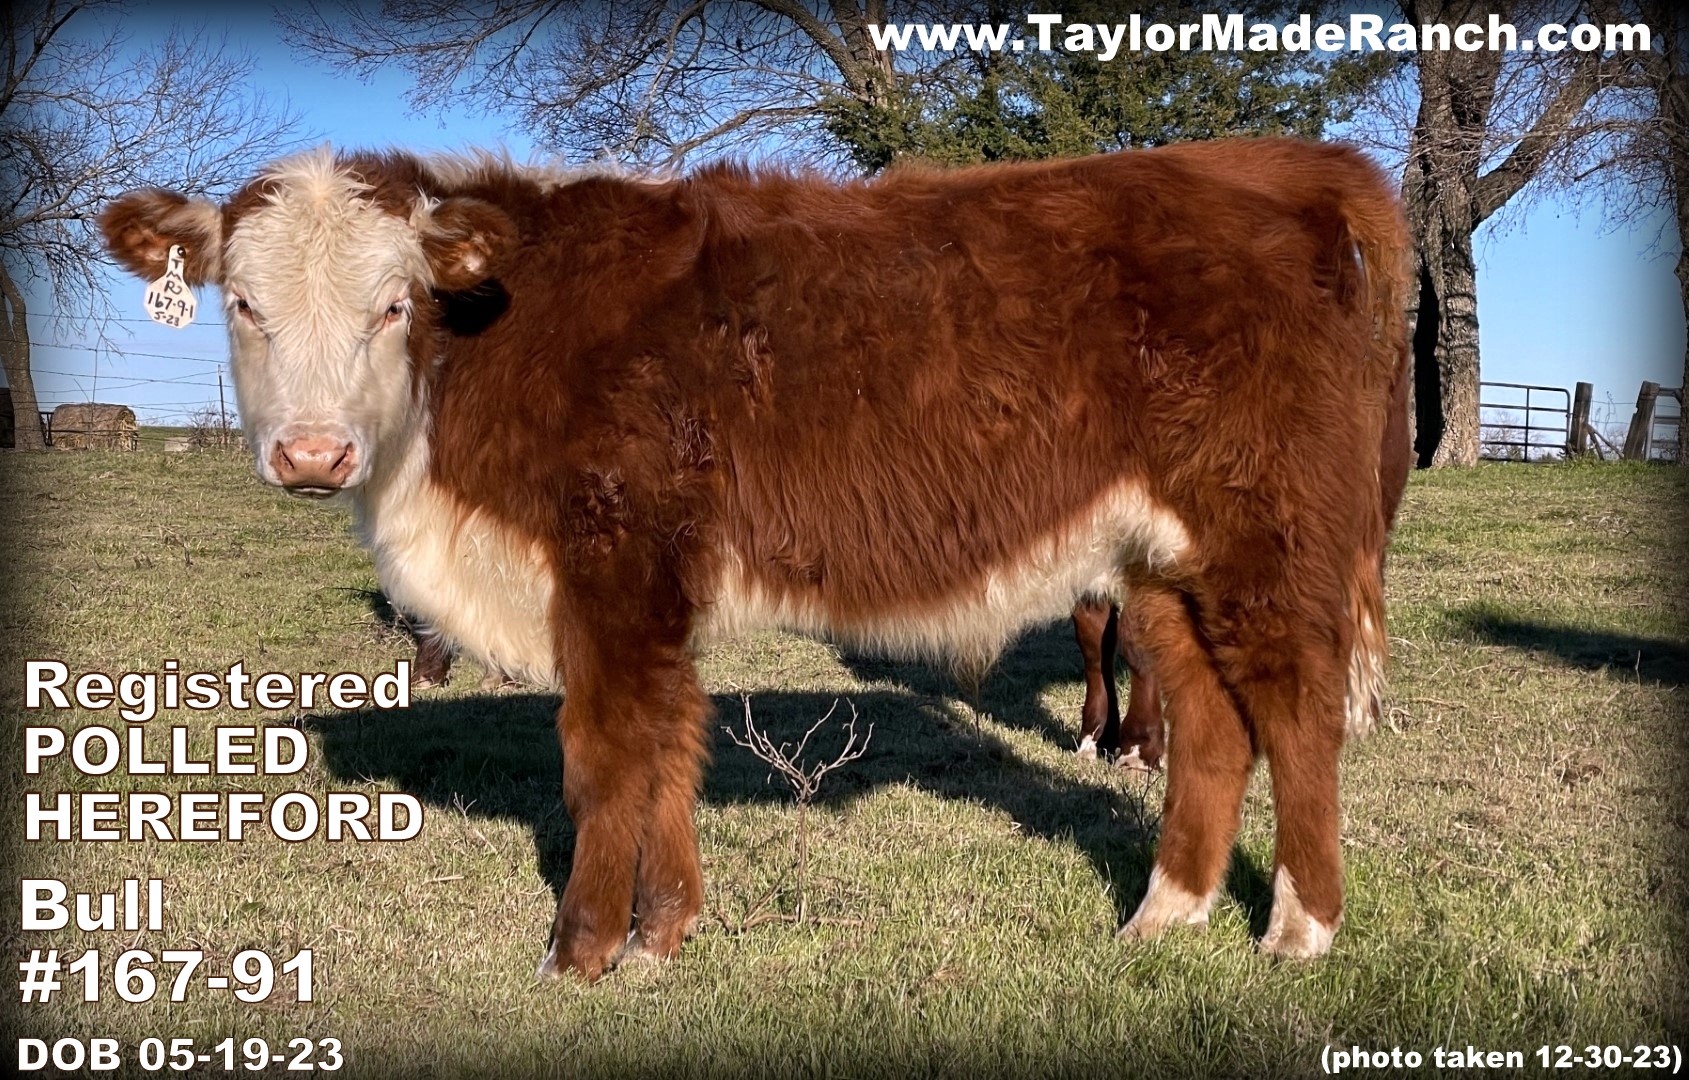 Registered Polled Hereford bull for sale in Northeast Texas #TaylorMadeRanch